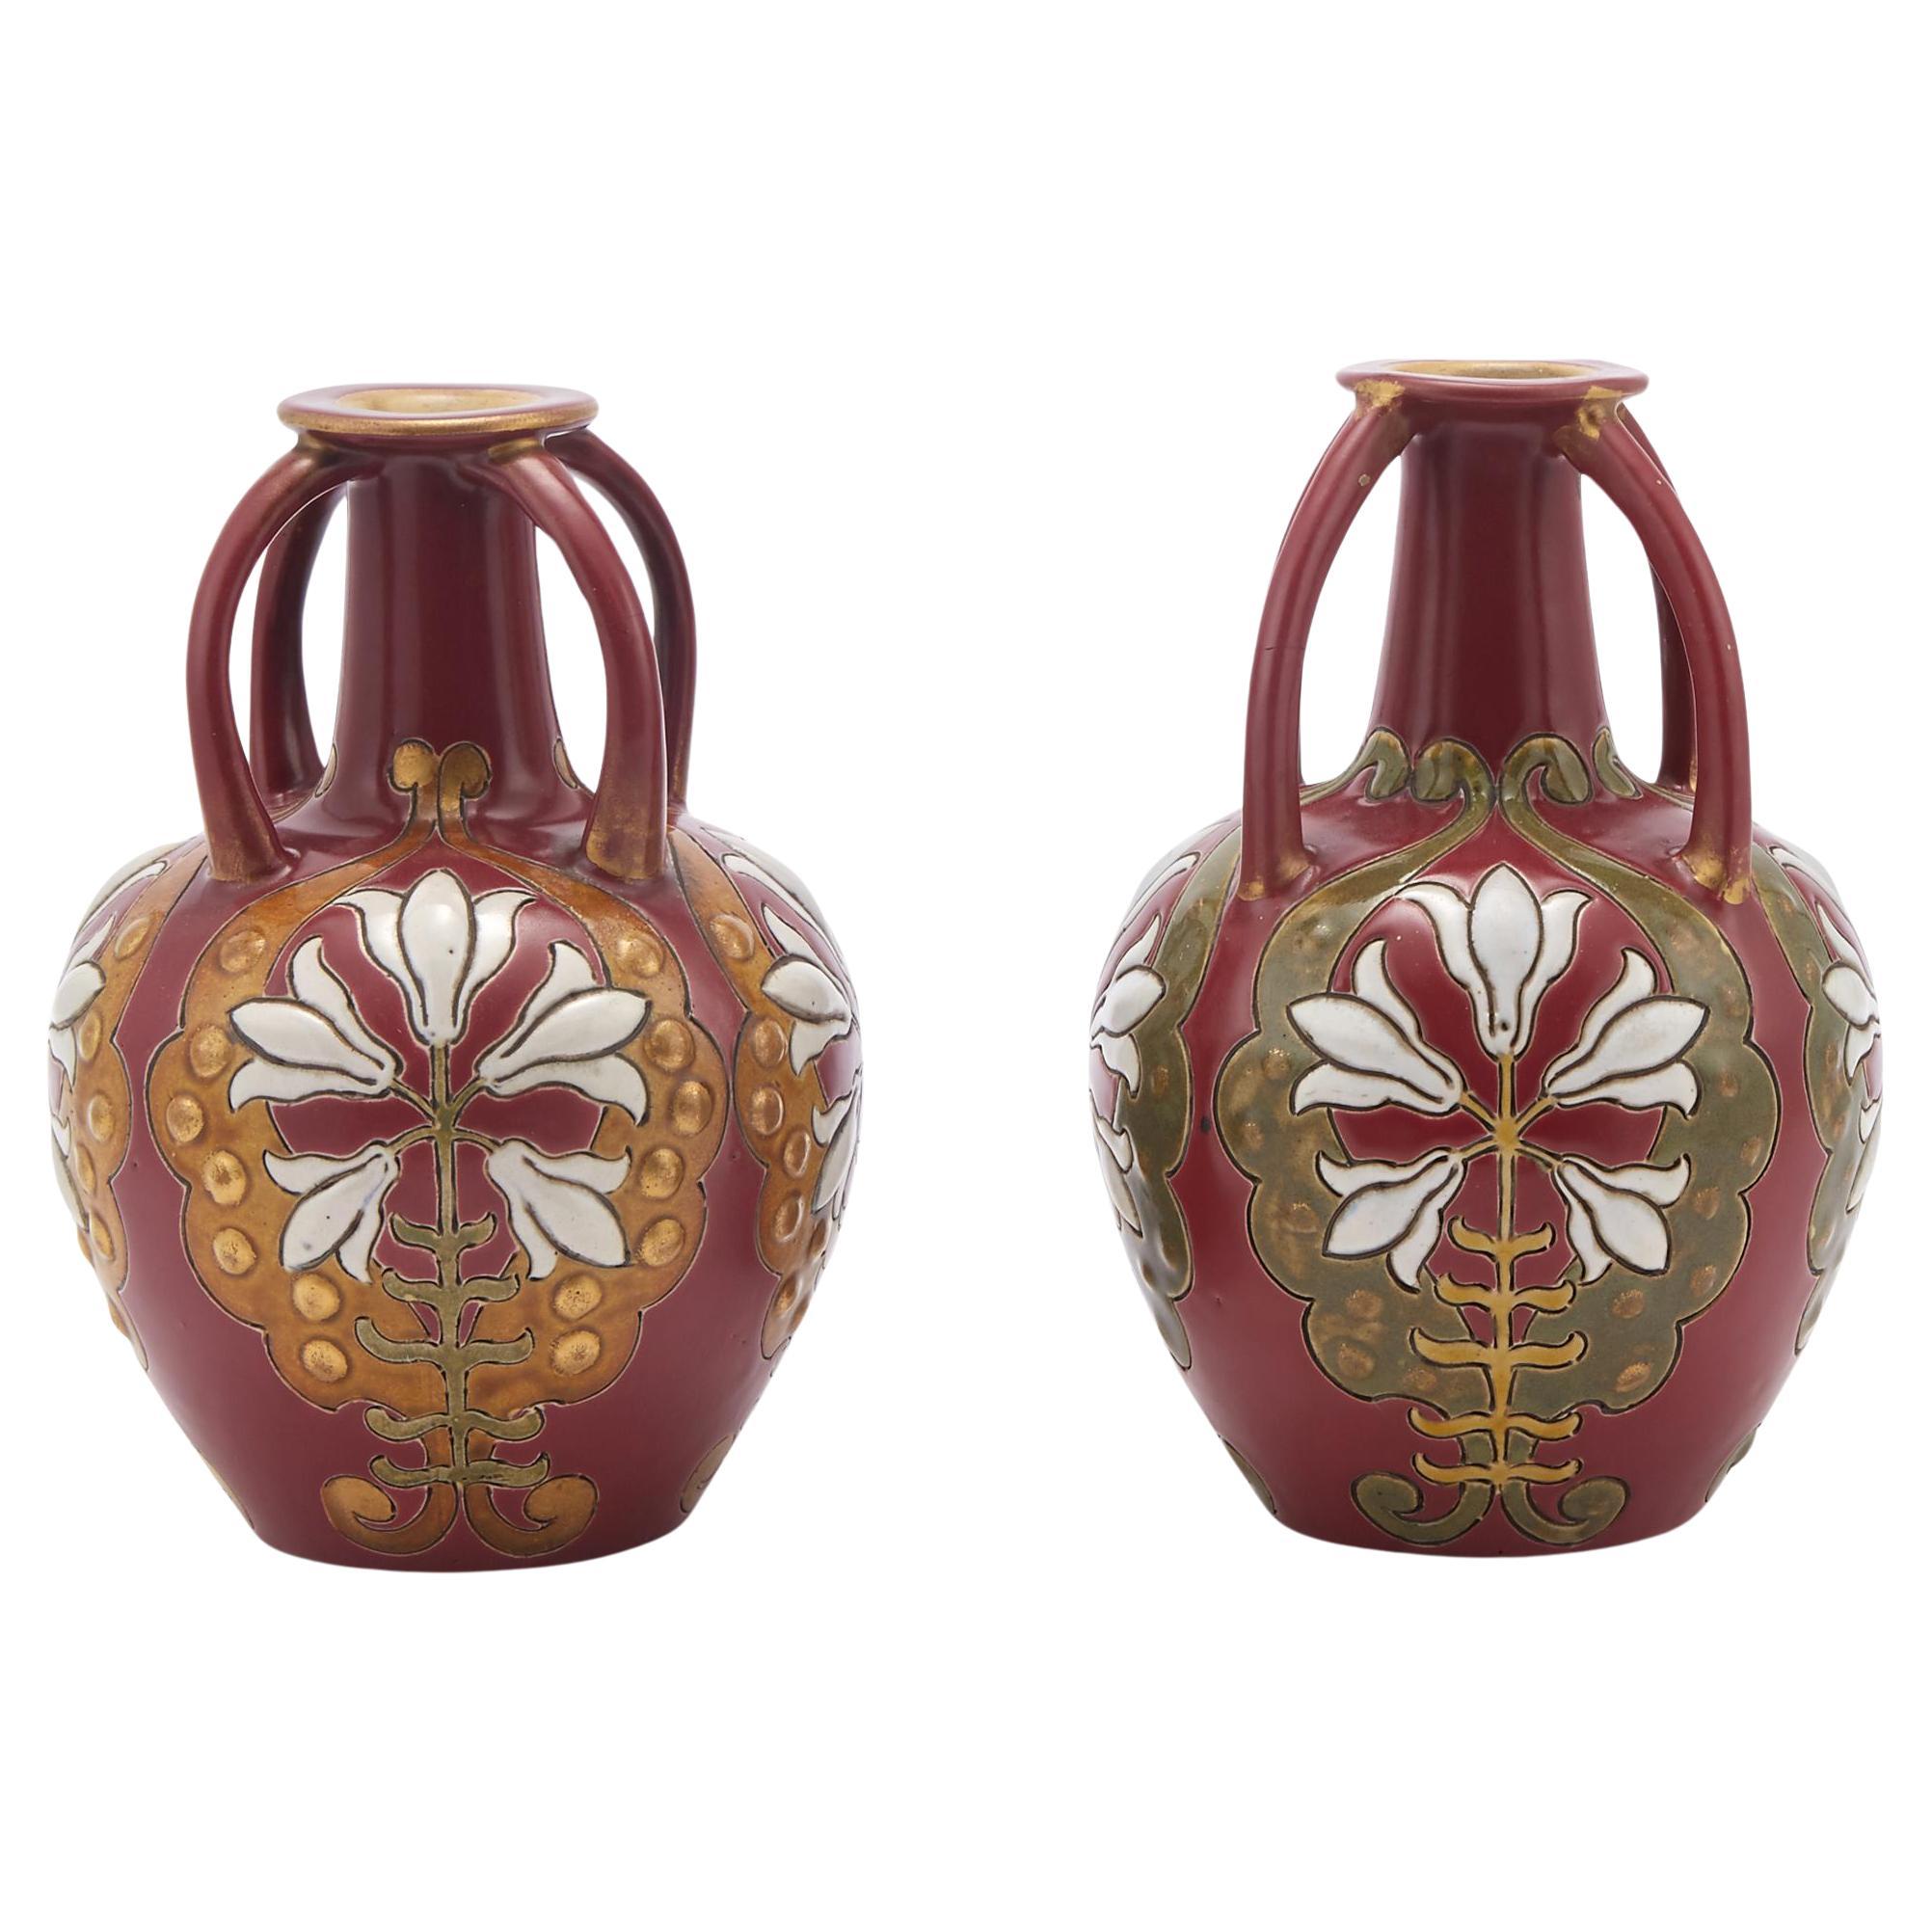 Mid 20th century Hand-Painted / decorated Pair Decorative Vases For Sale